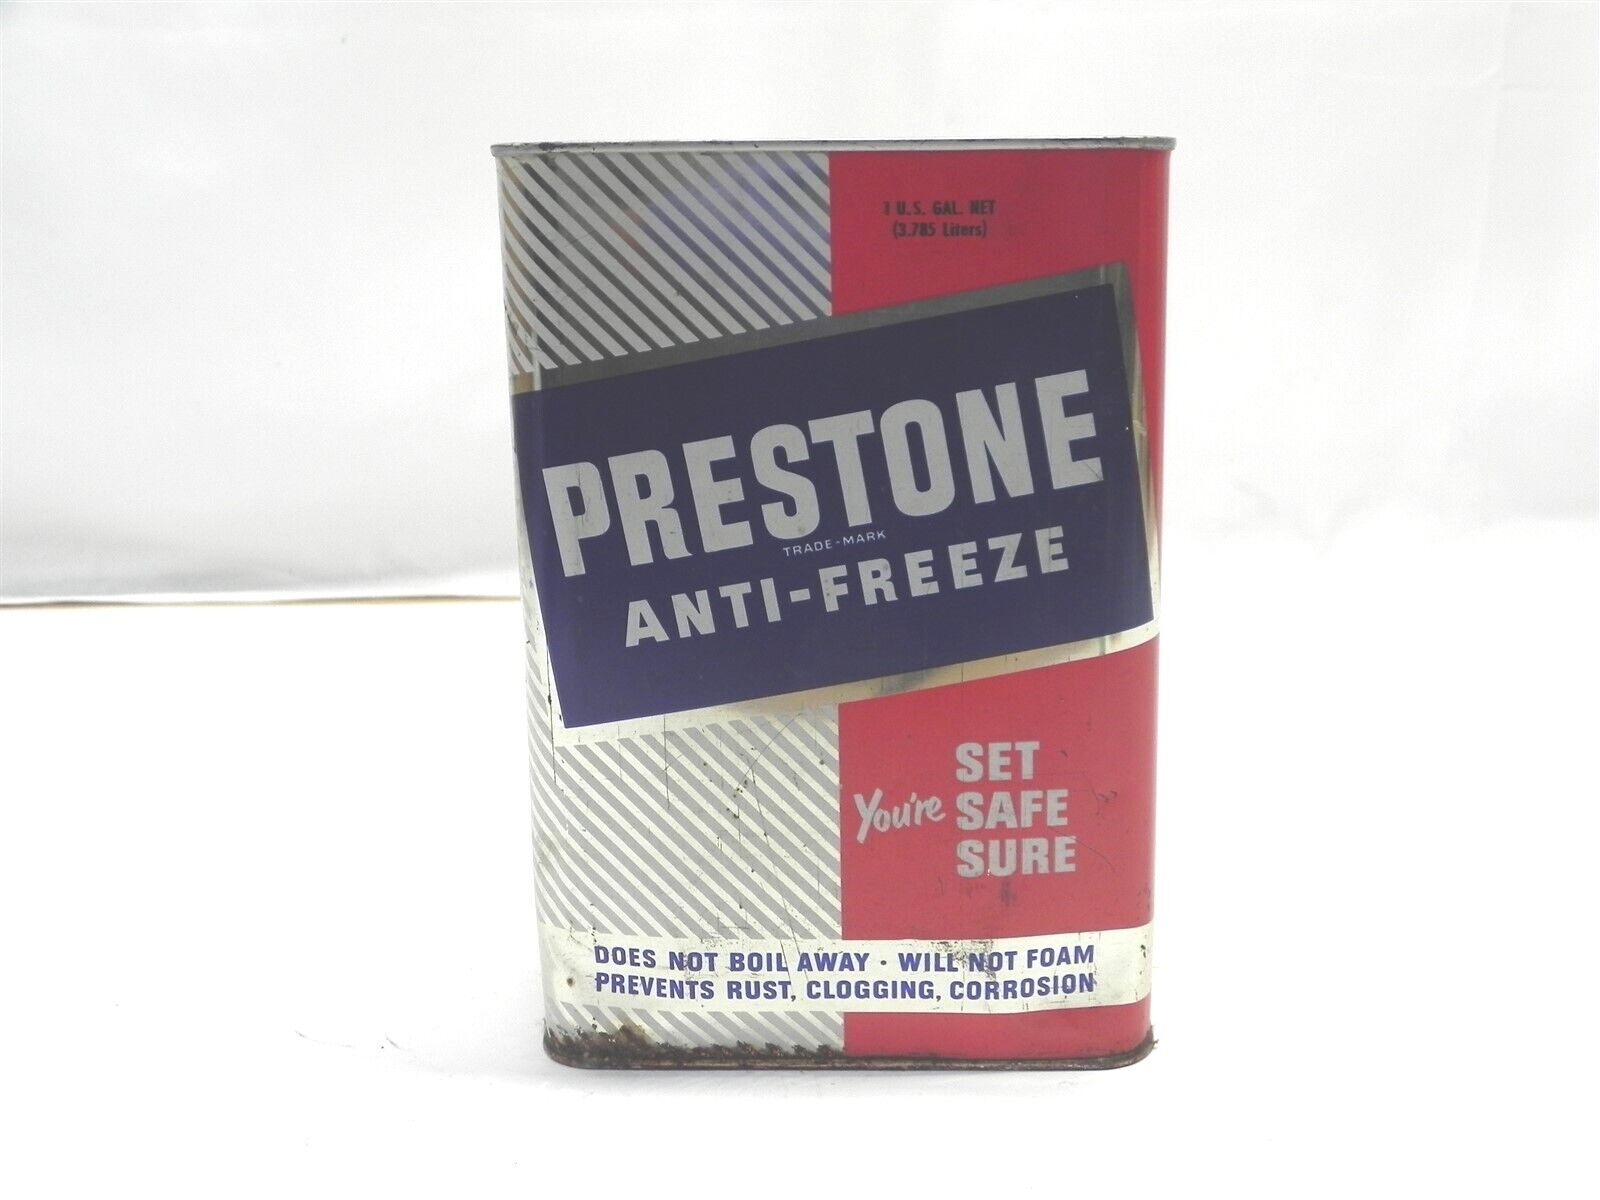 VINTAGE EVEREADY PRESTONE ANTI-FREEZE 1 US GALLON CAN *SEALED FULL* PRE-OWNED 